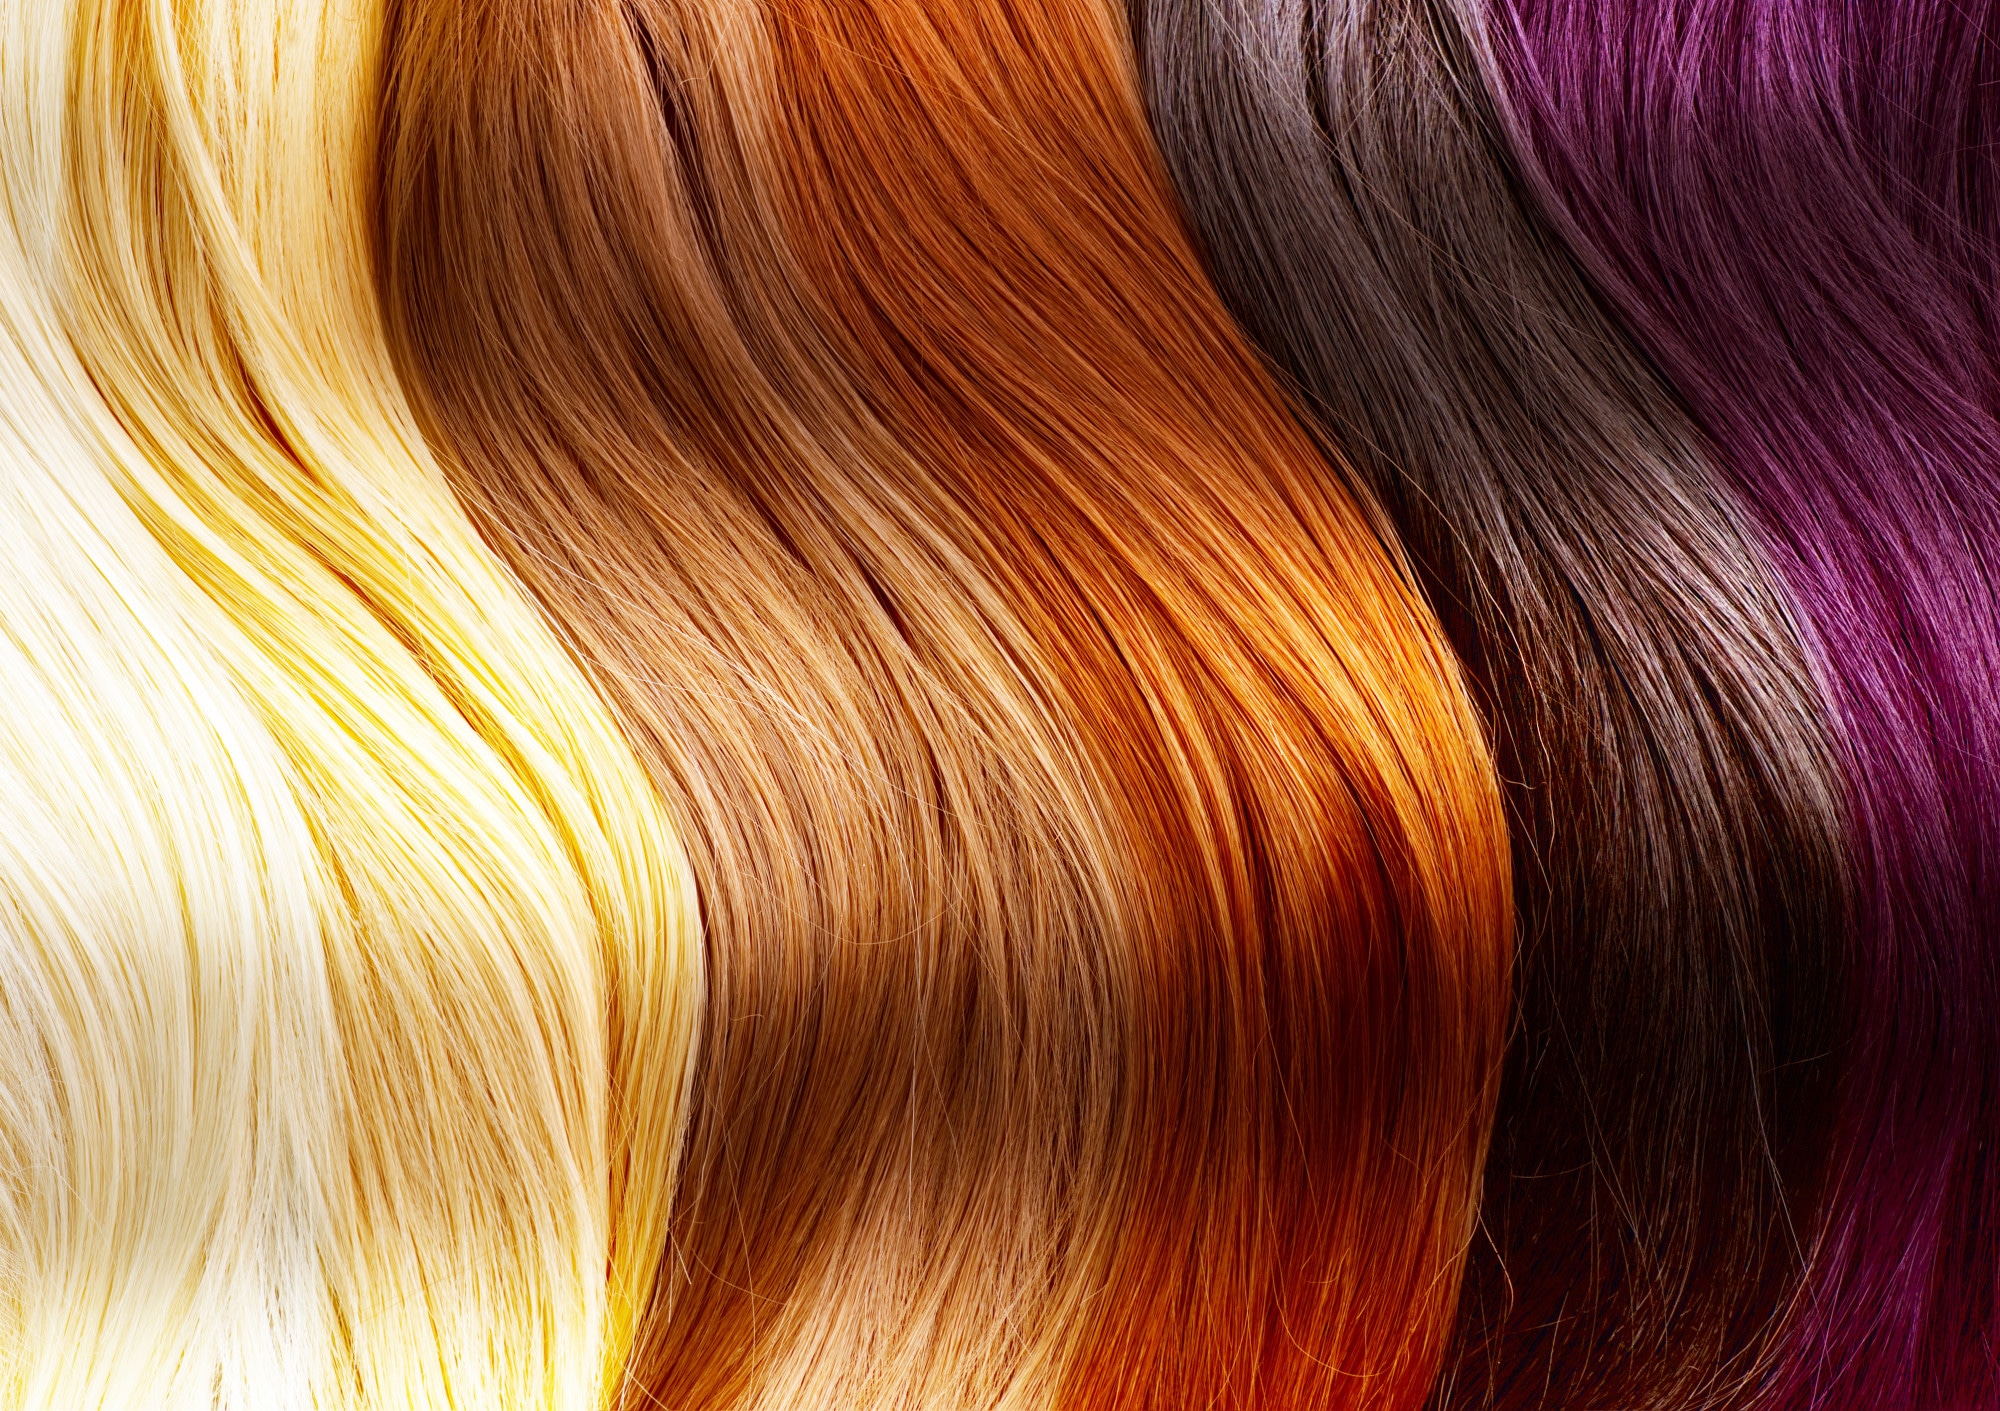 9 Best Hair Colors Without Bleach to Minimize Damage